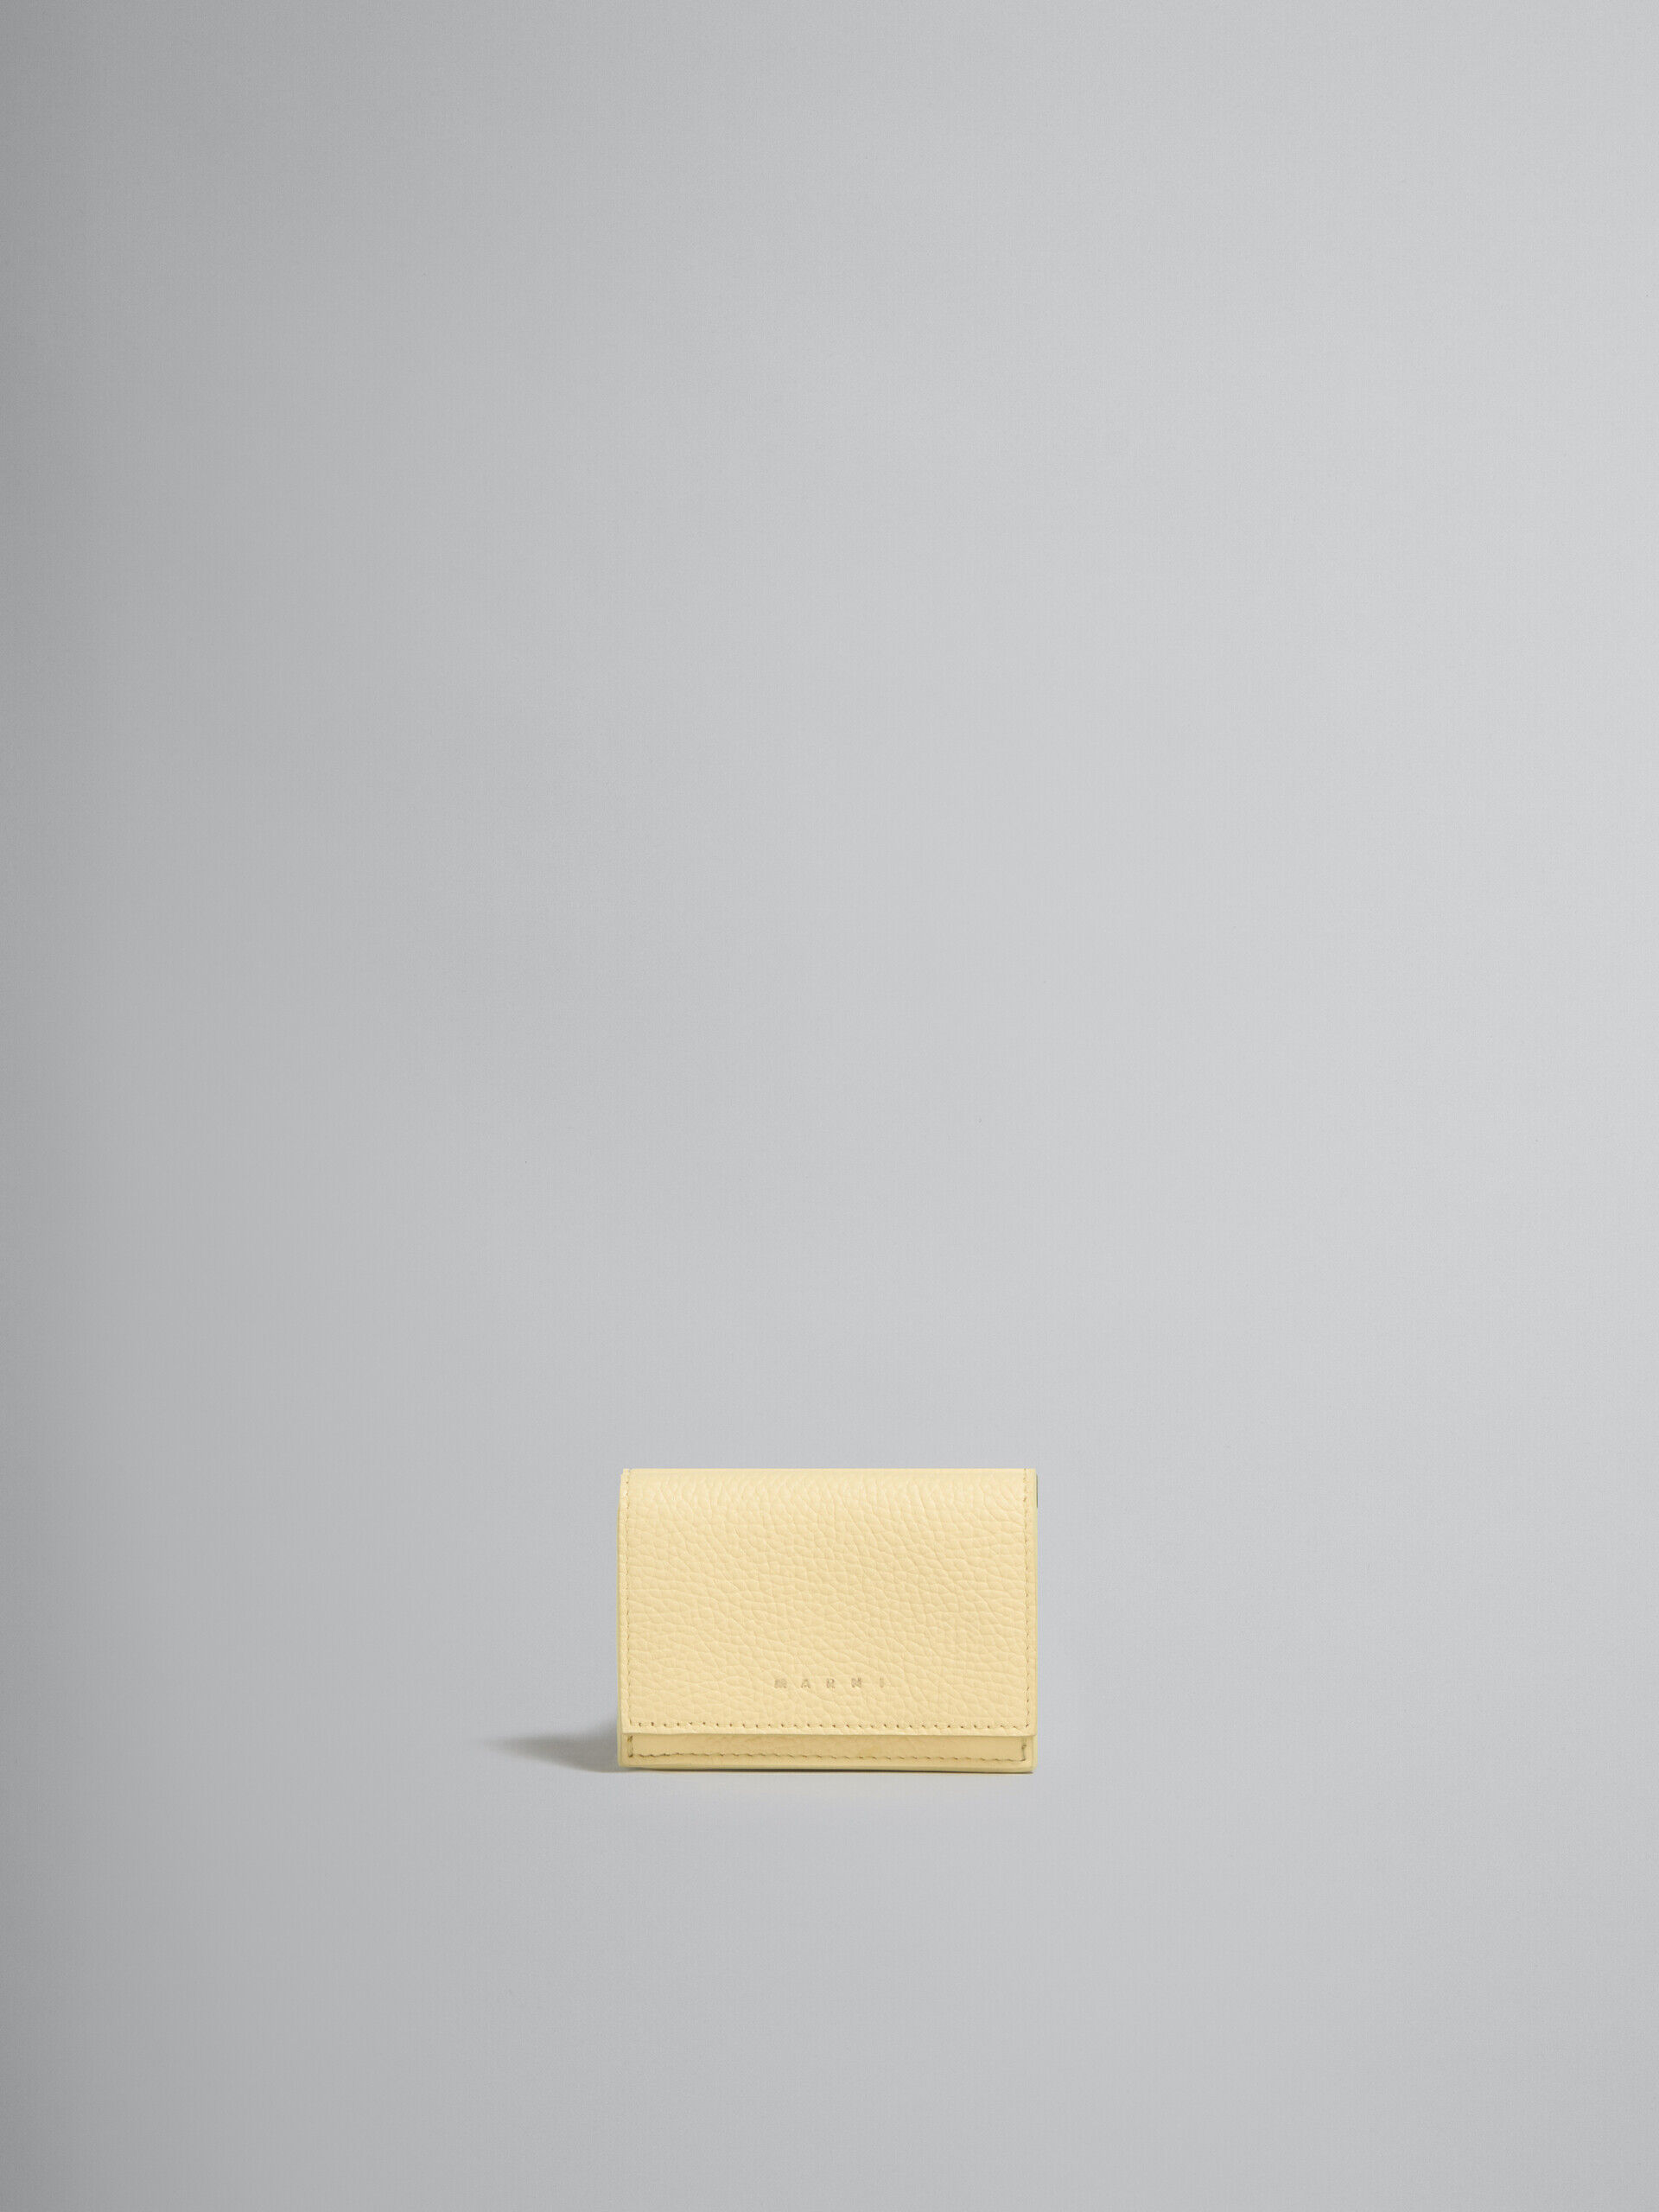 Light yellow leather trifold Venice wallet with marbled interior